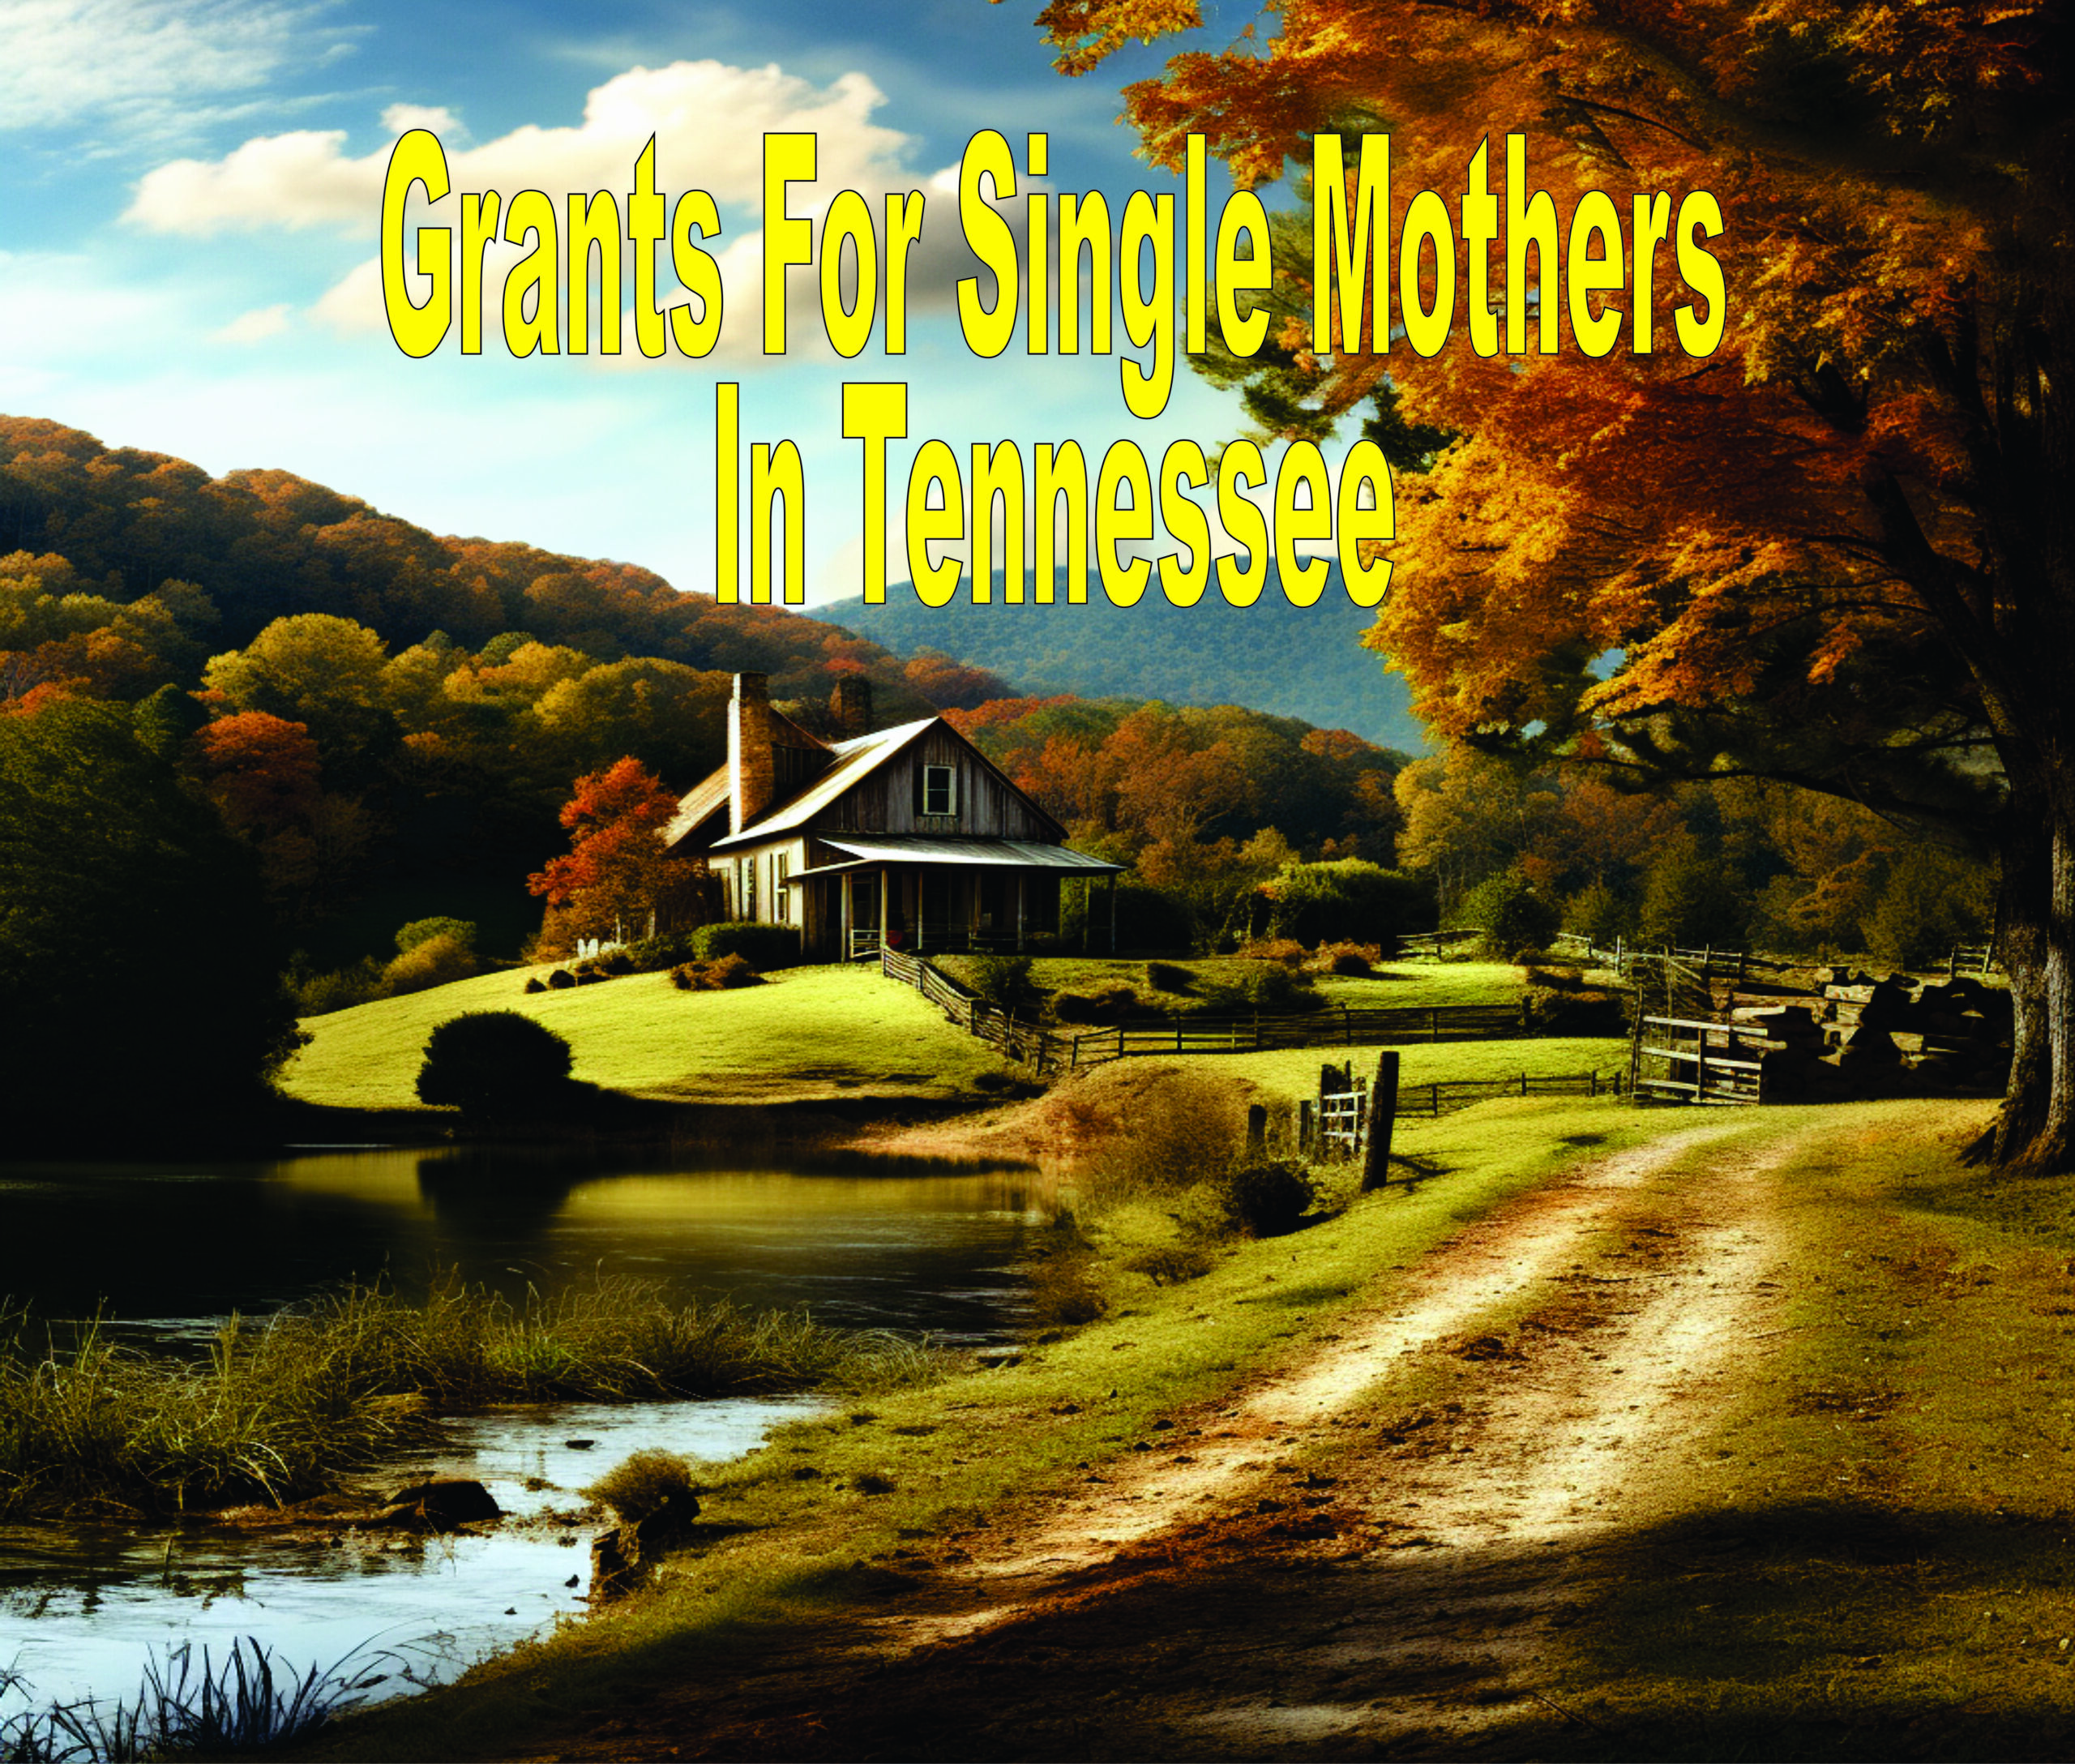 Grants For Single Mothers In Tennessee